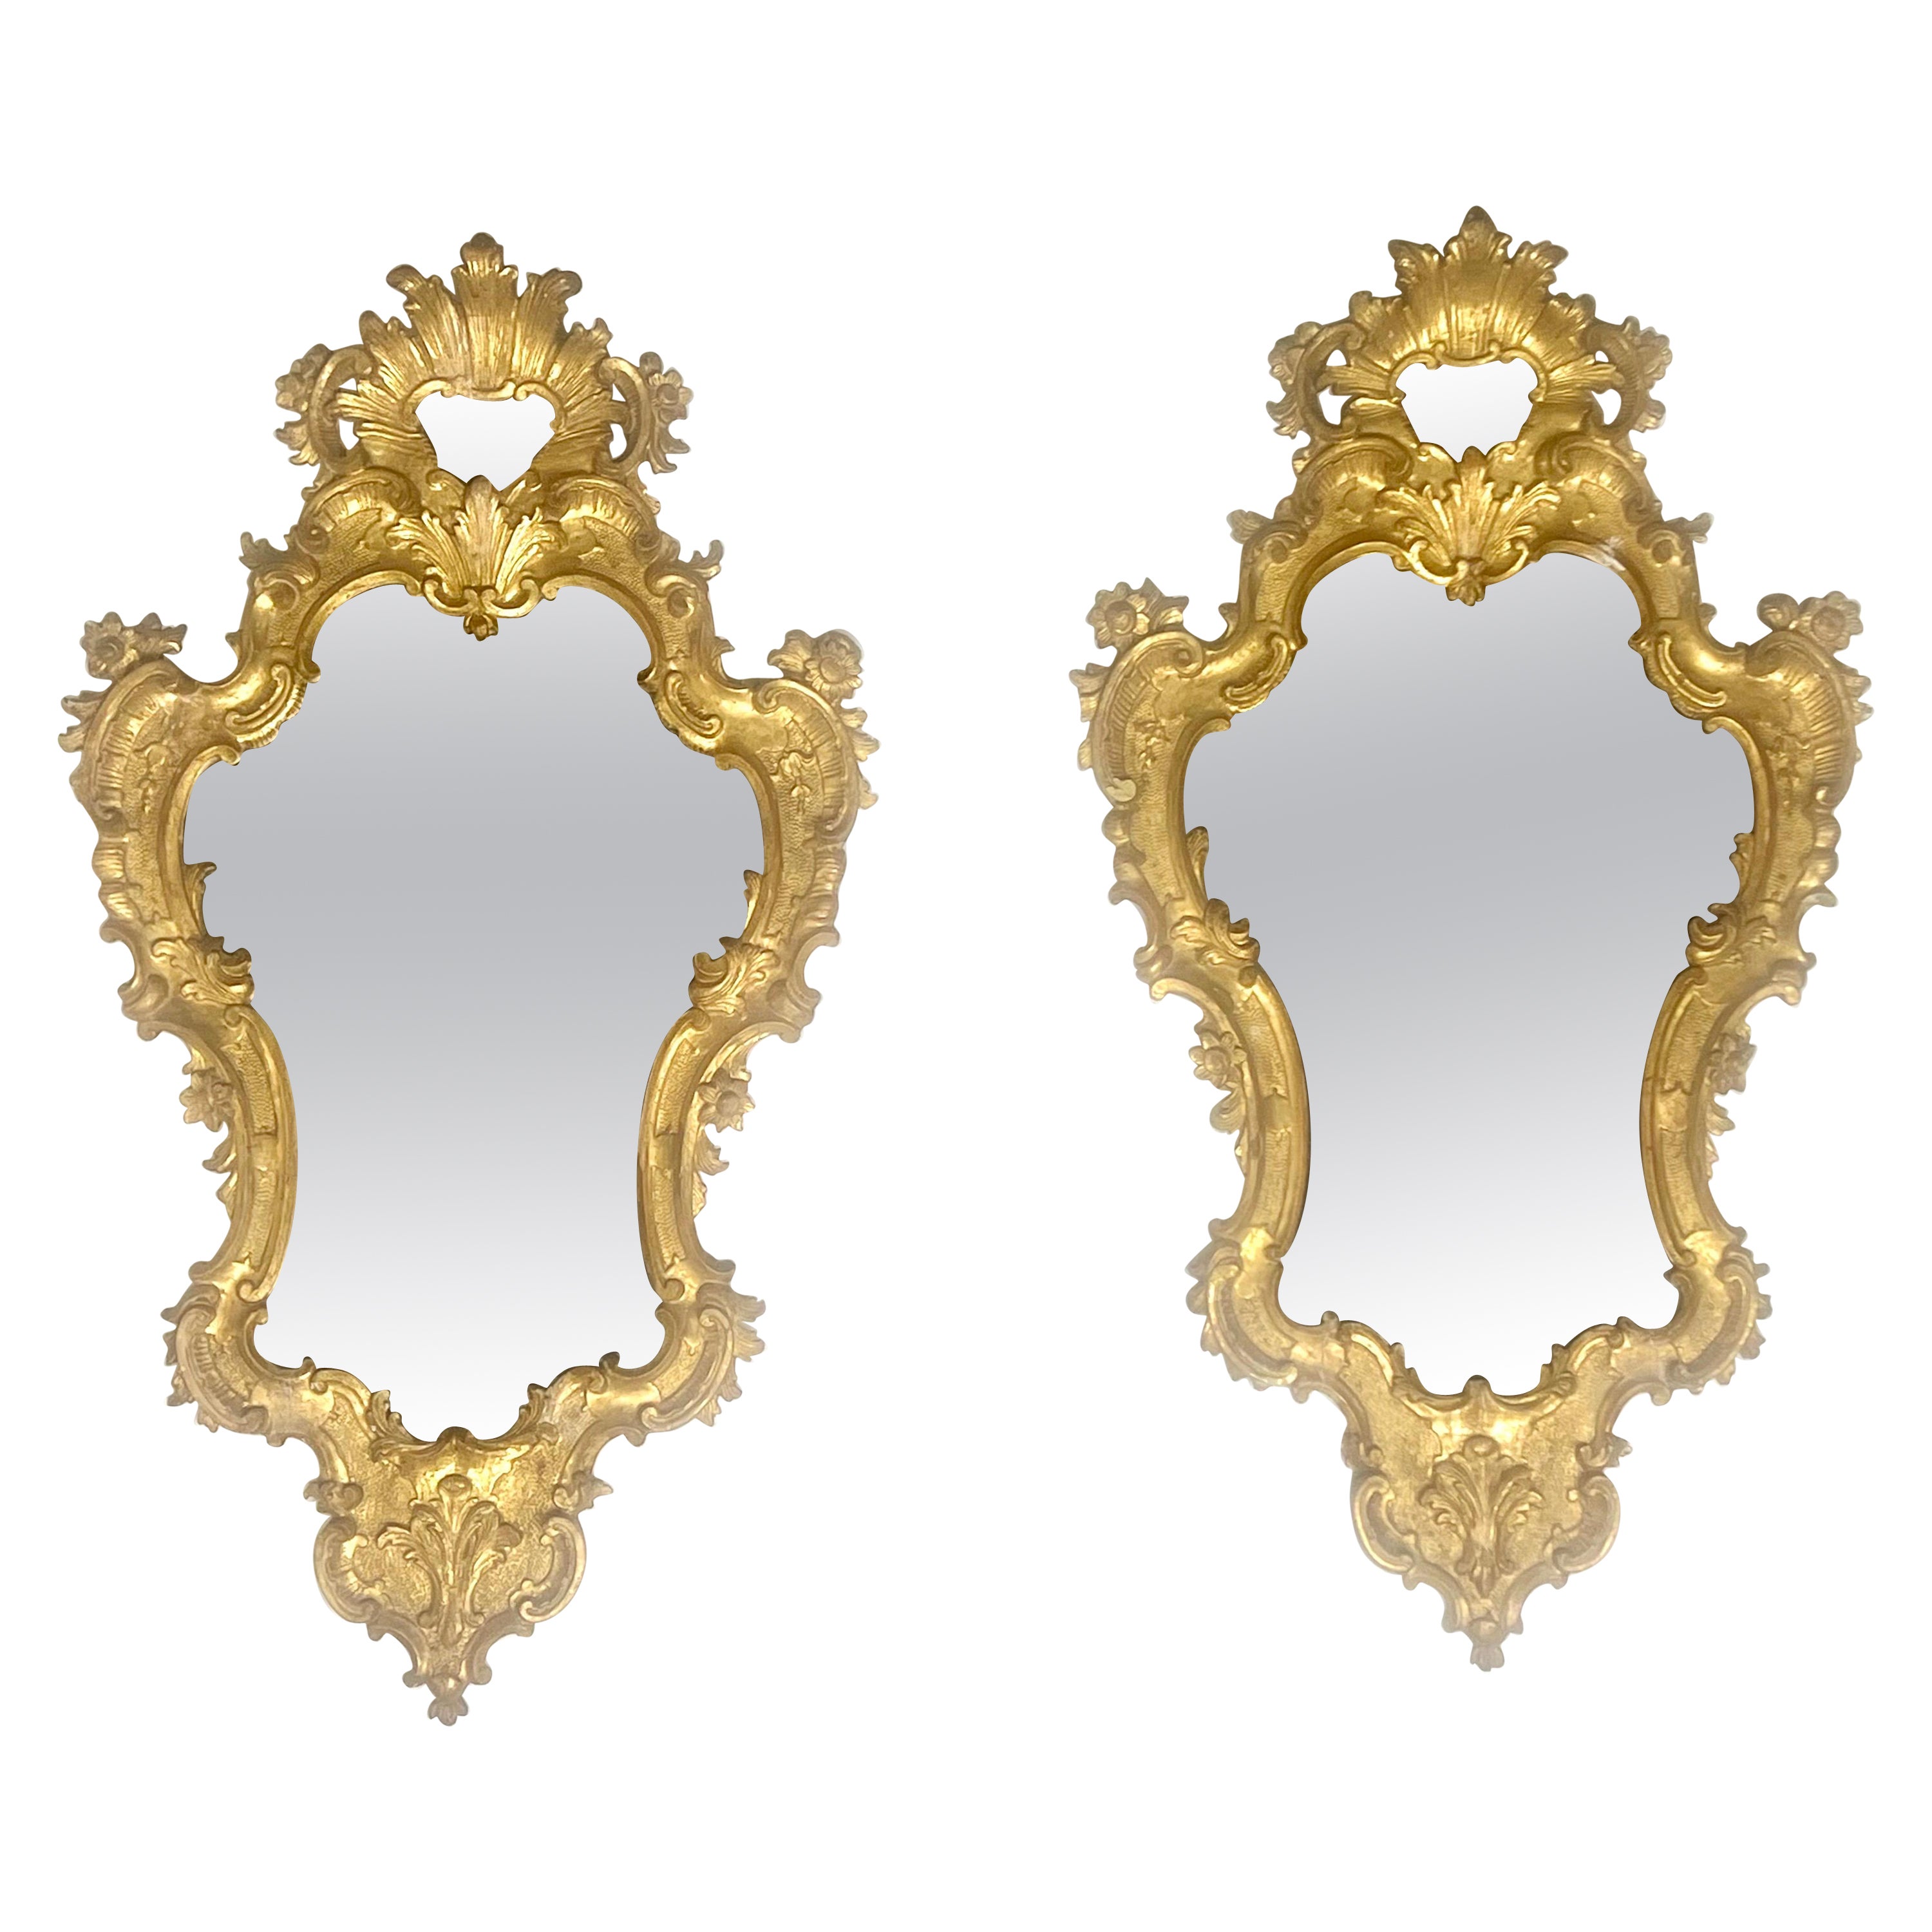 19th century Italian Carved Giltwood Mirrors